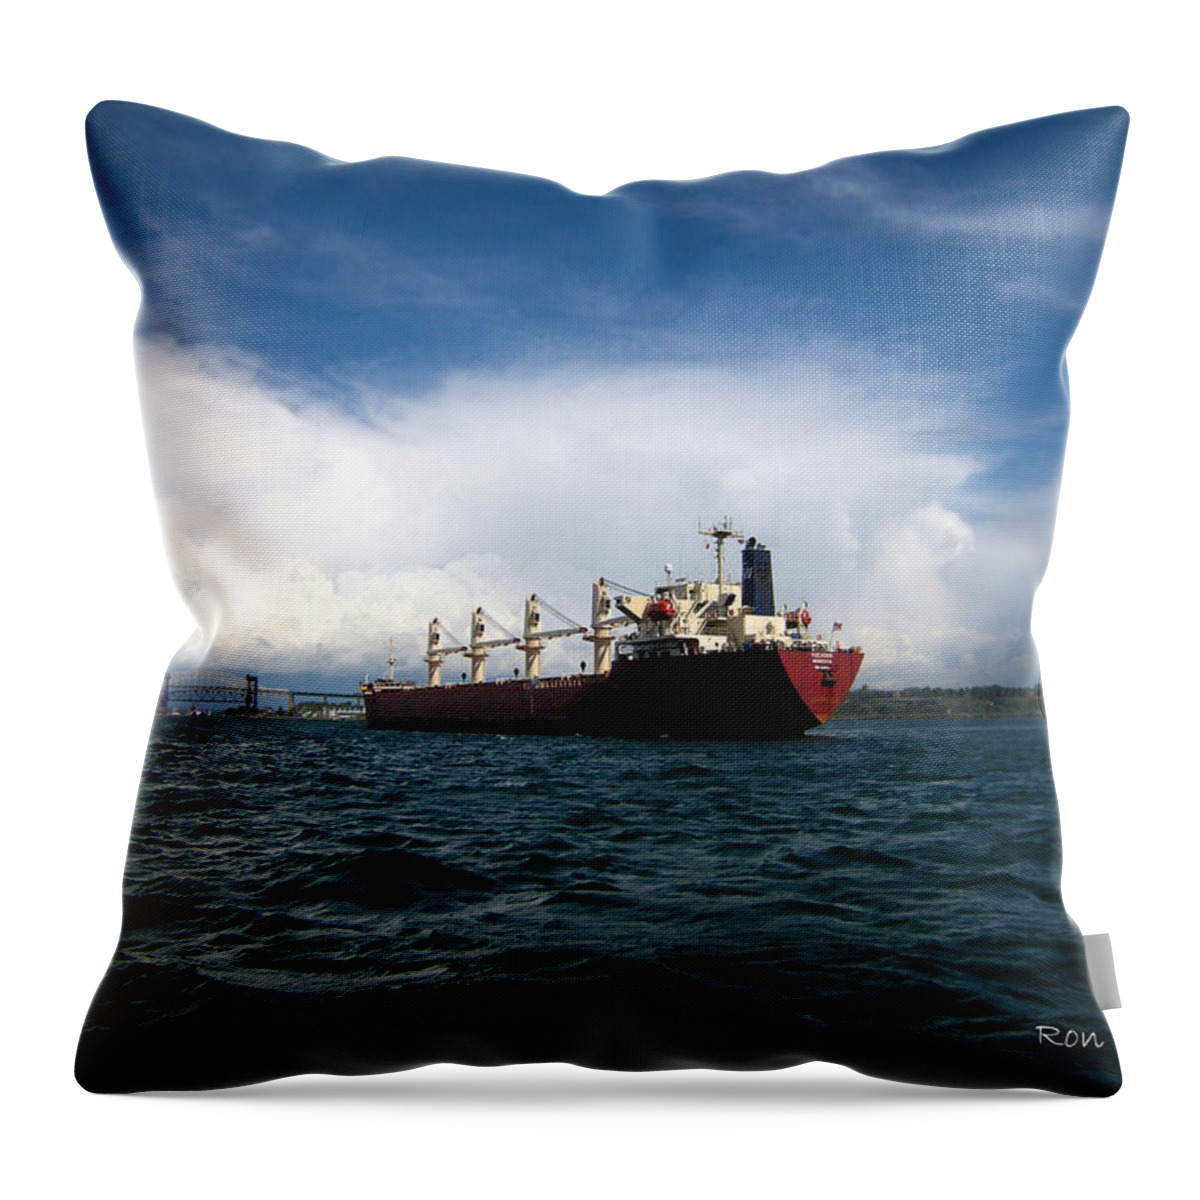 Sailing Throw Pillow featuring the photograph Heading Home by Ron Haist